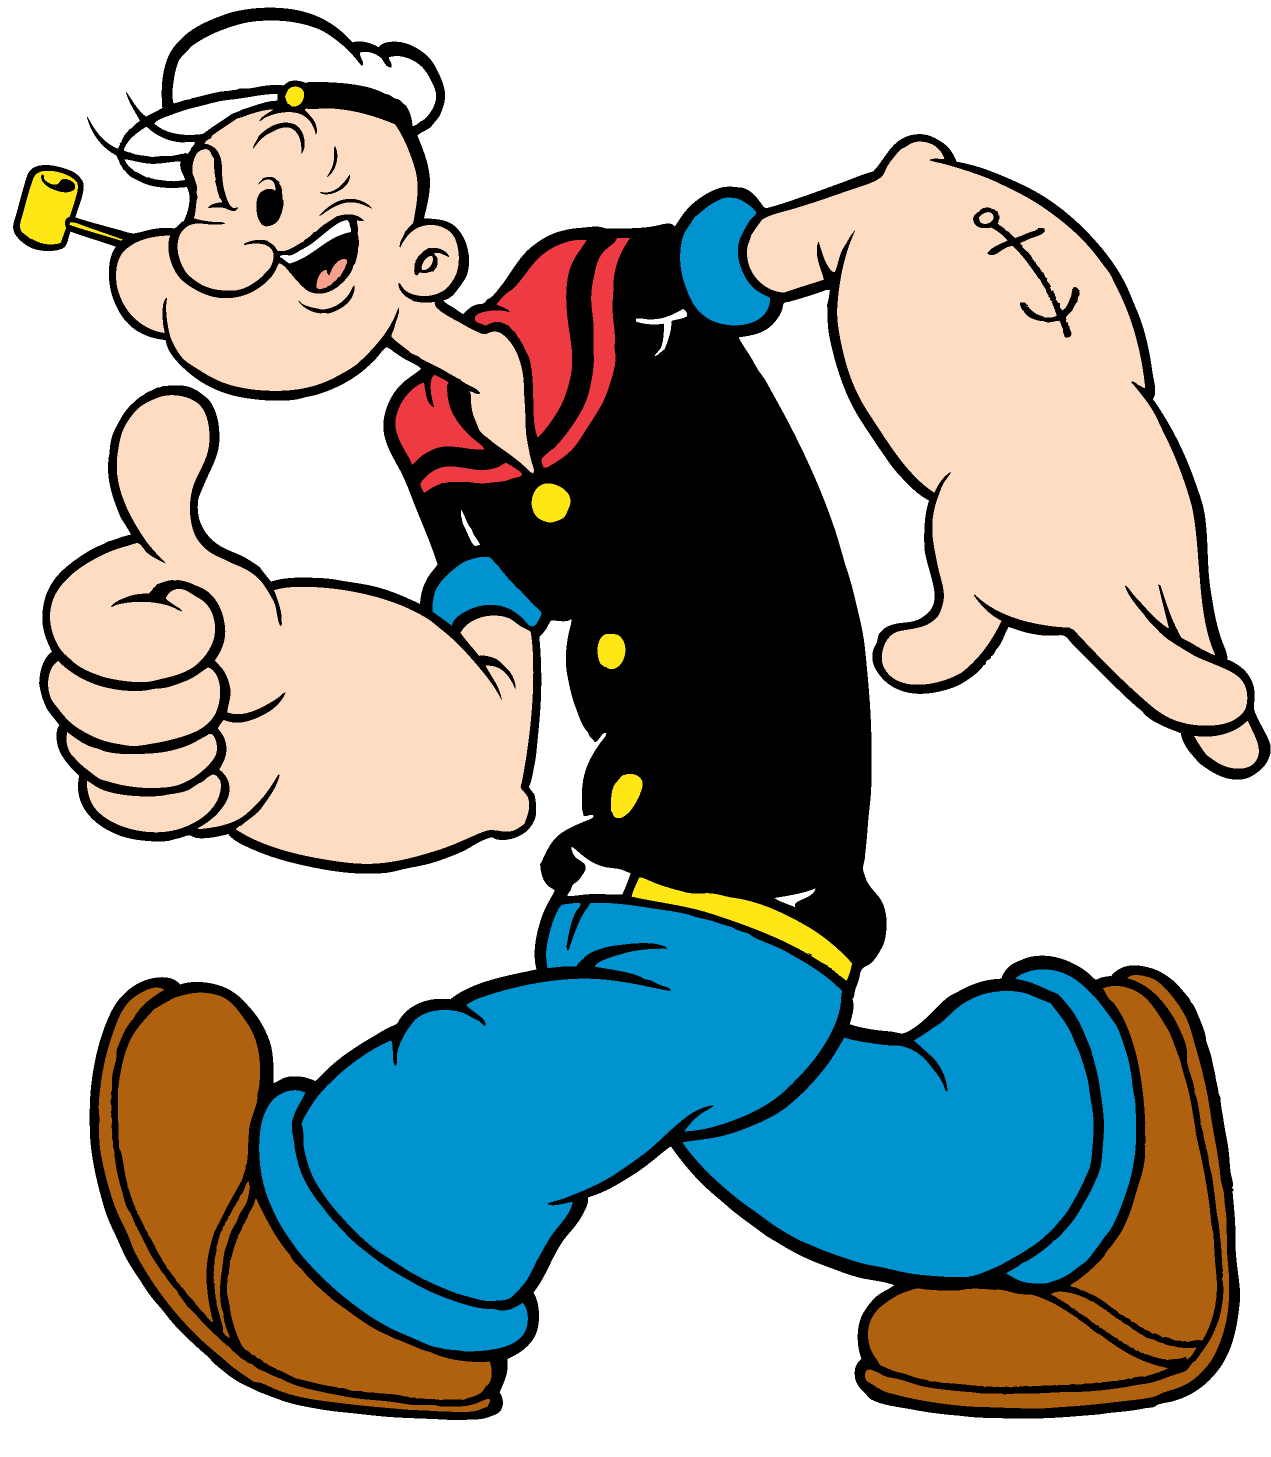 Popeye Pictures and Images